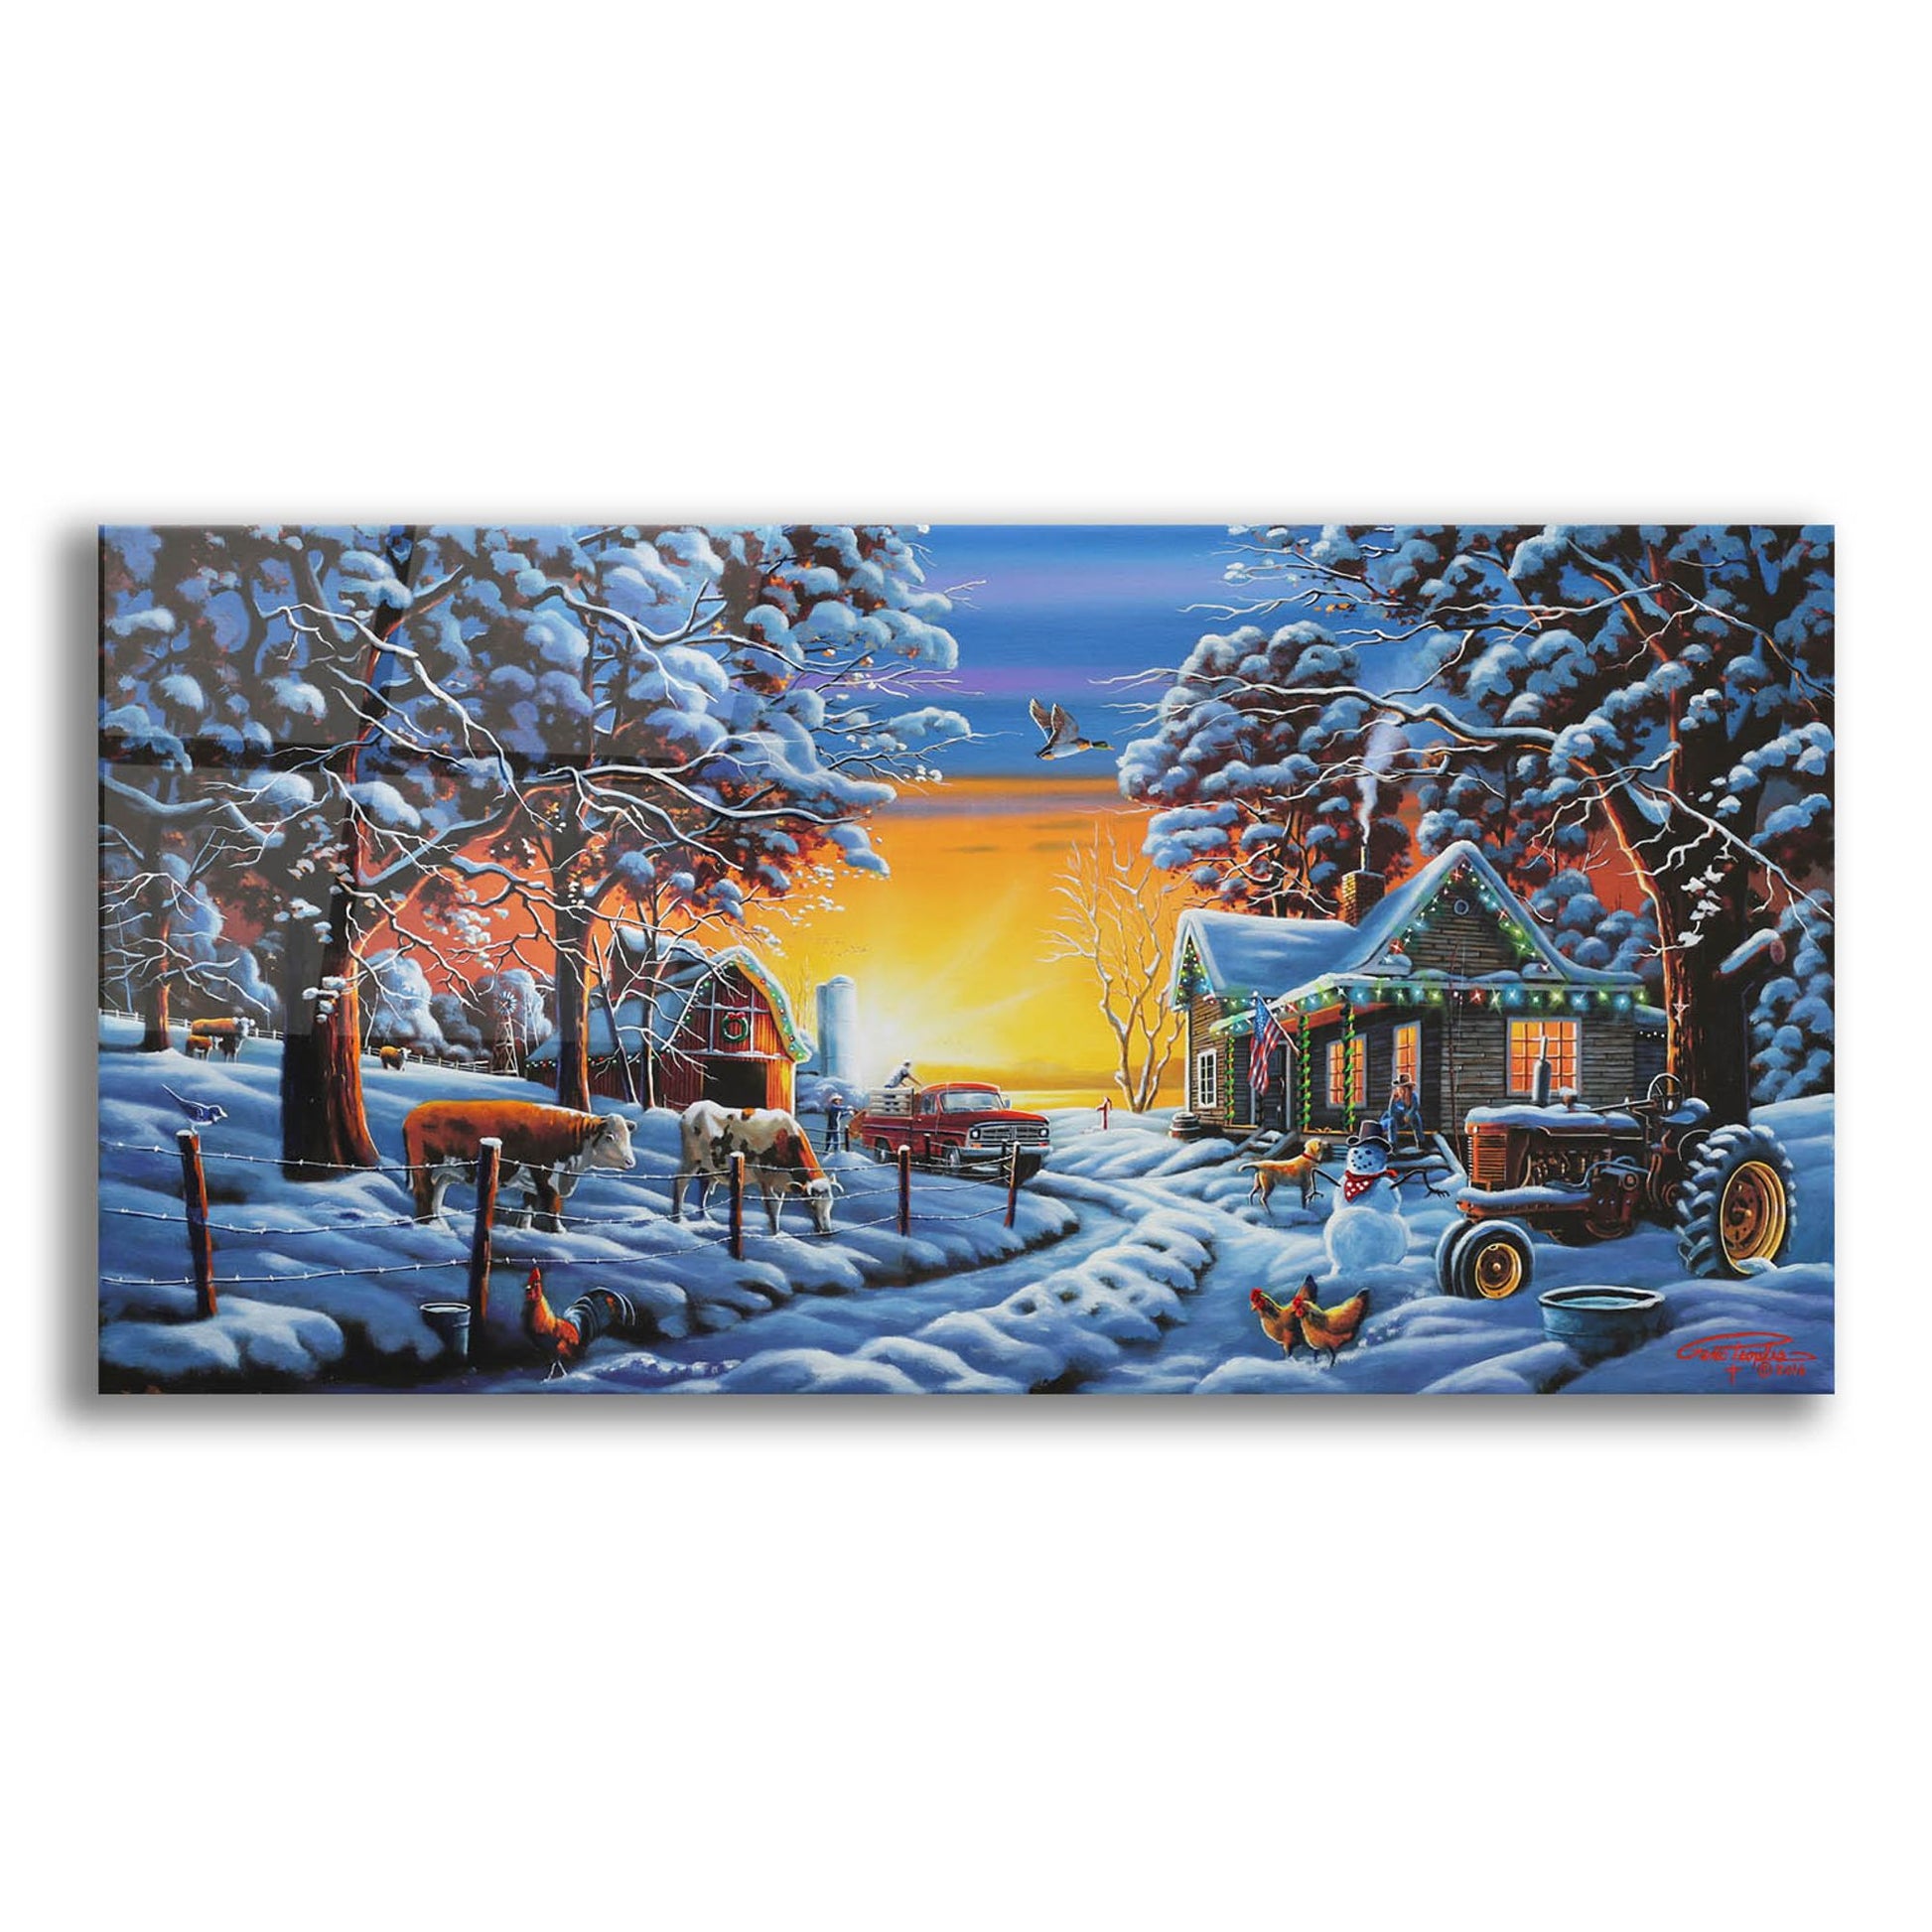 Epic Art 'Country Christmas' by Geno Peoples, Acrylic Glass Wall Art,24x12